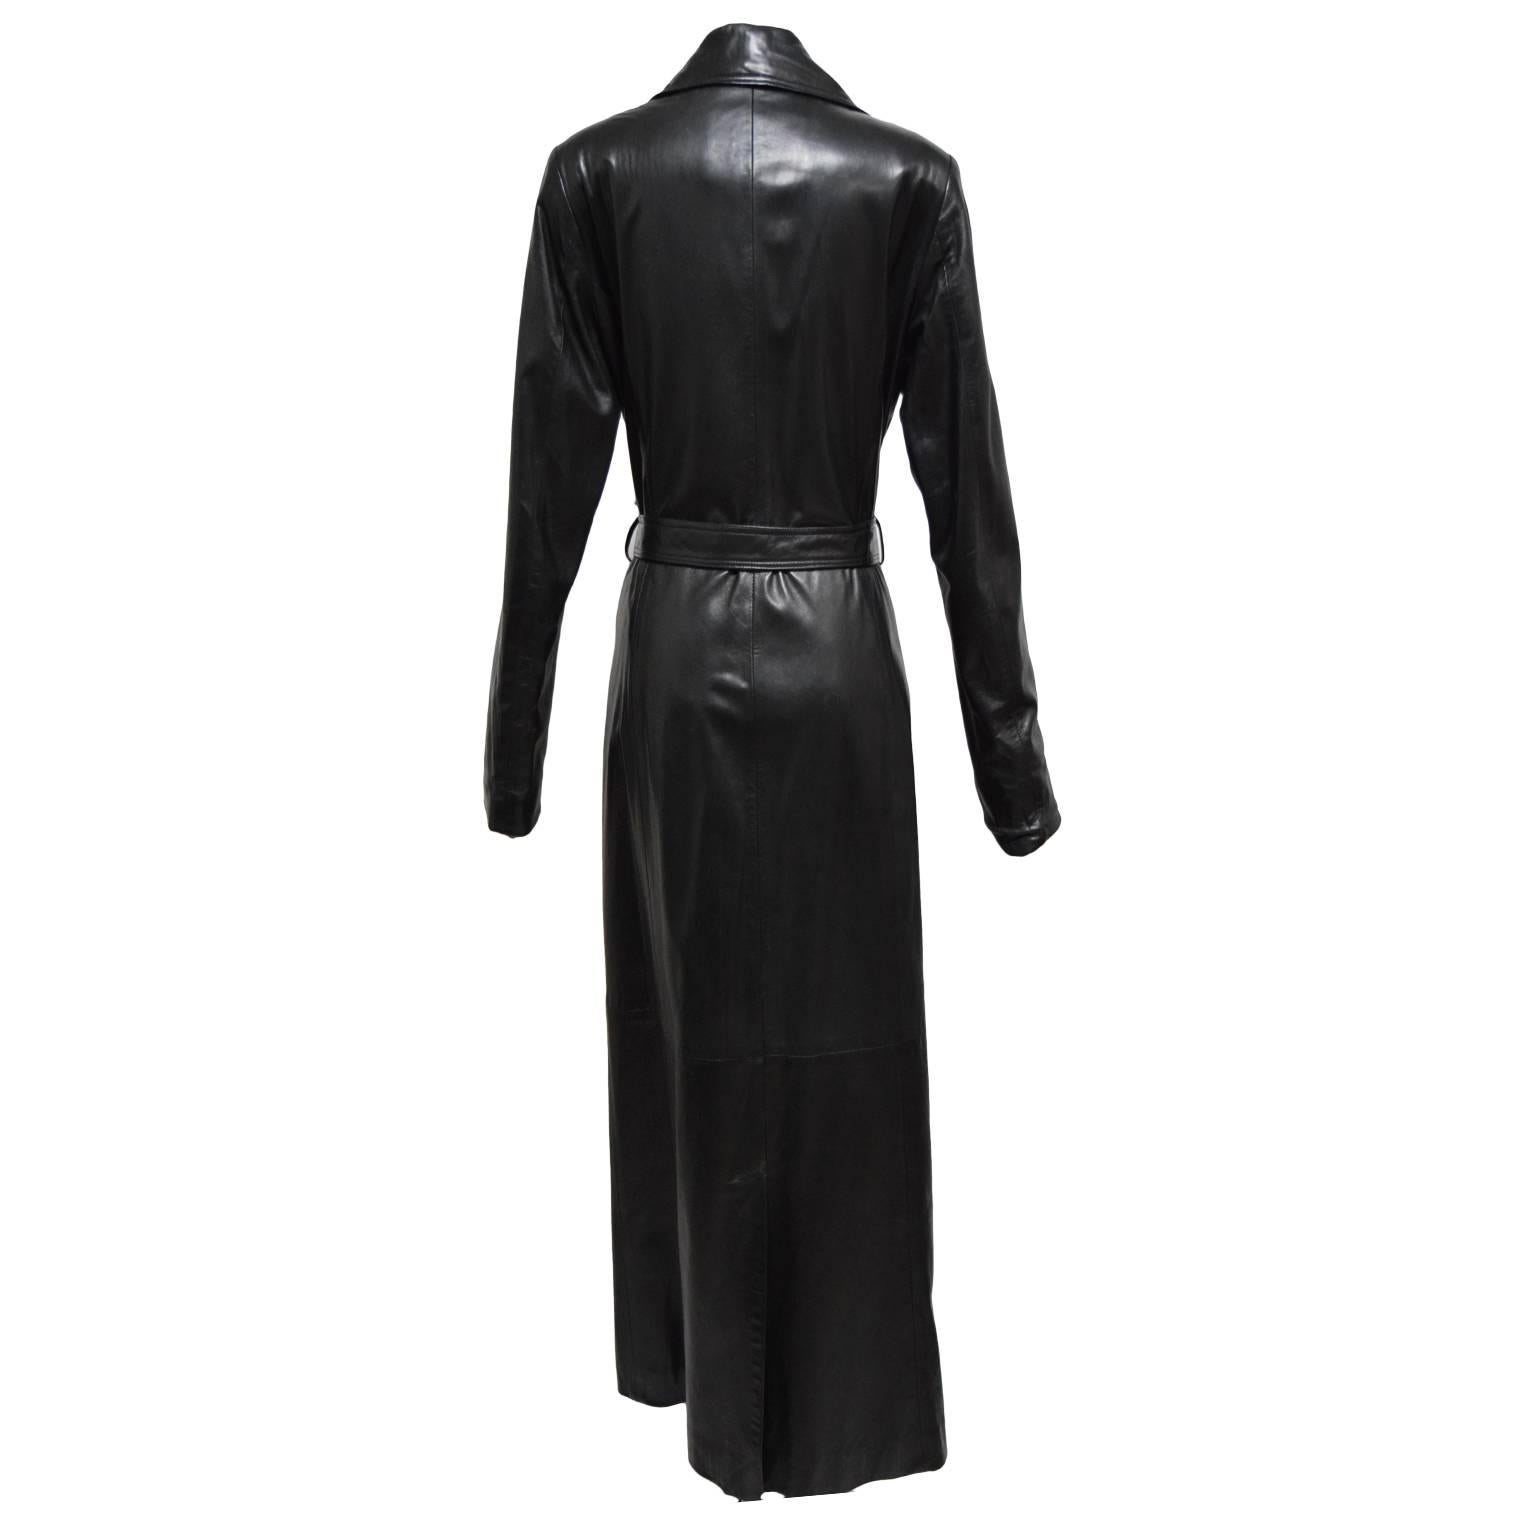 This classic piece by La Nouvelle Renaissance is made of smooth rich black leather and is fully lined in silk. The Jacket itself has a trench coat style, front pockets, gold button closures and a belted waist. Great for a rainy day in the city. 